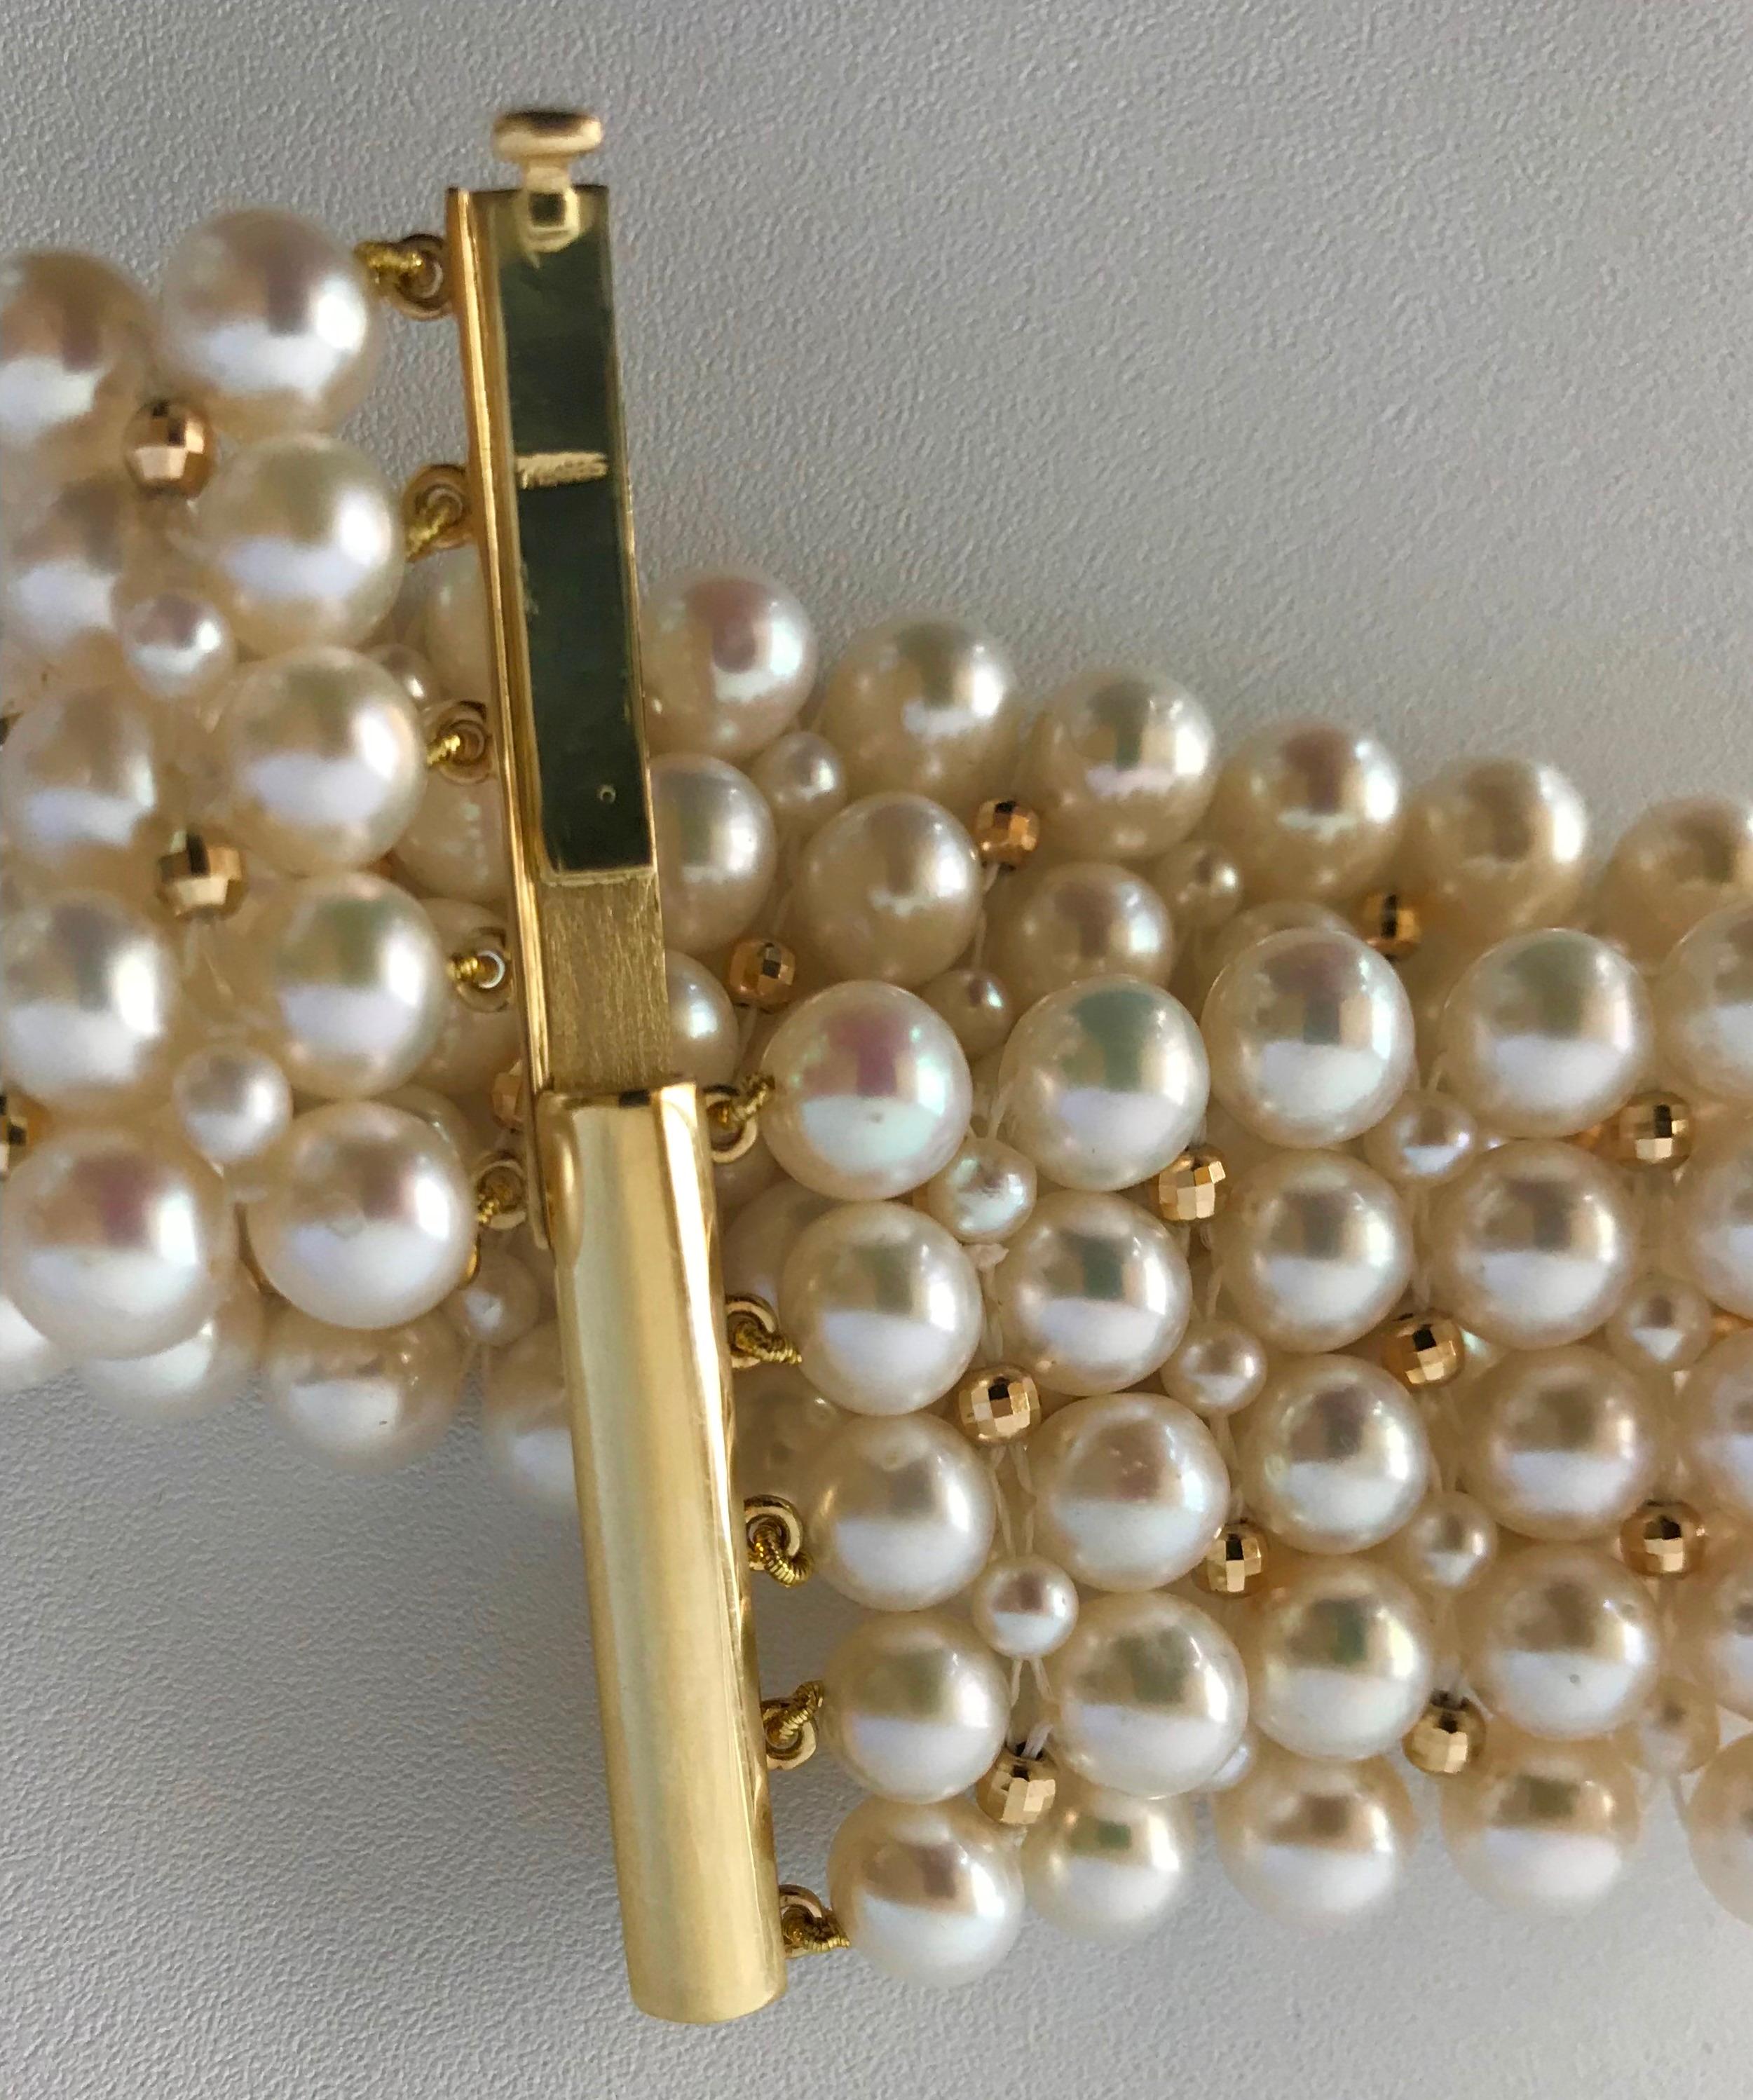 Marina J Stunning Woven Pearl Bracelet with 14 Karat Yellow Gold Beads and Clasp For Sale 4